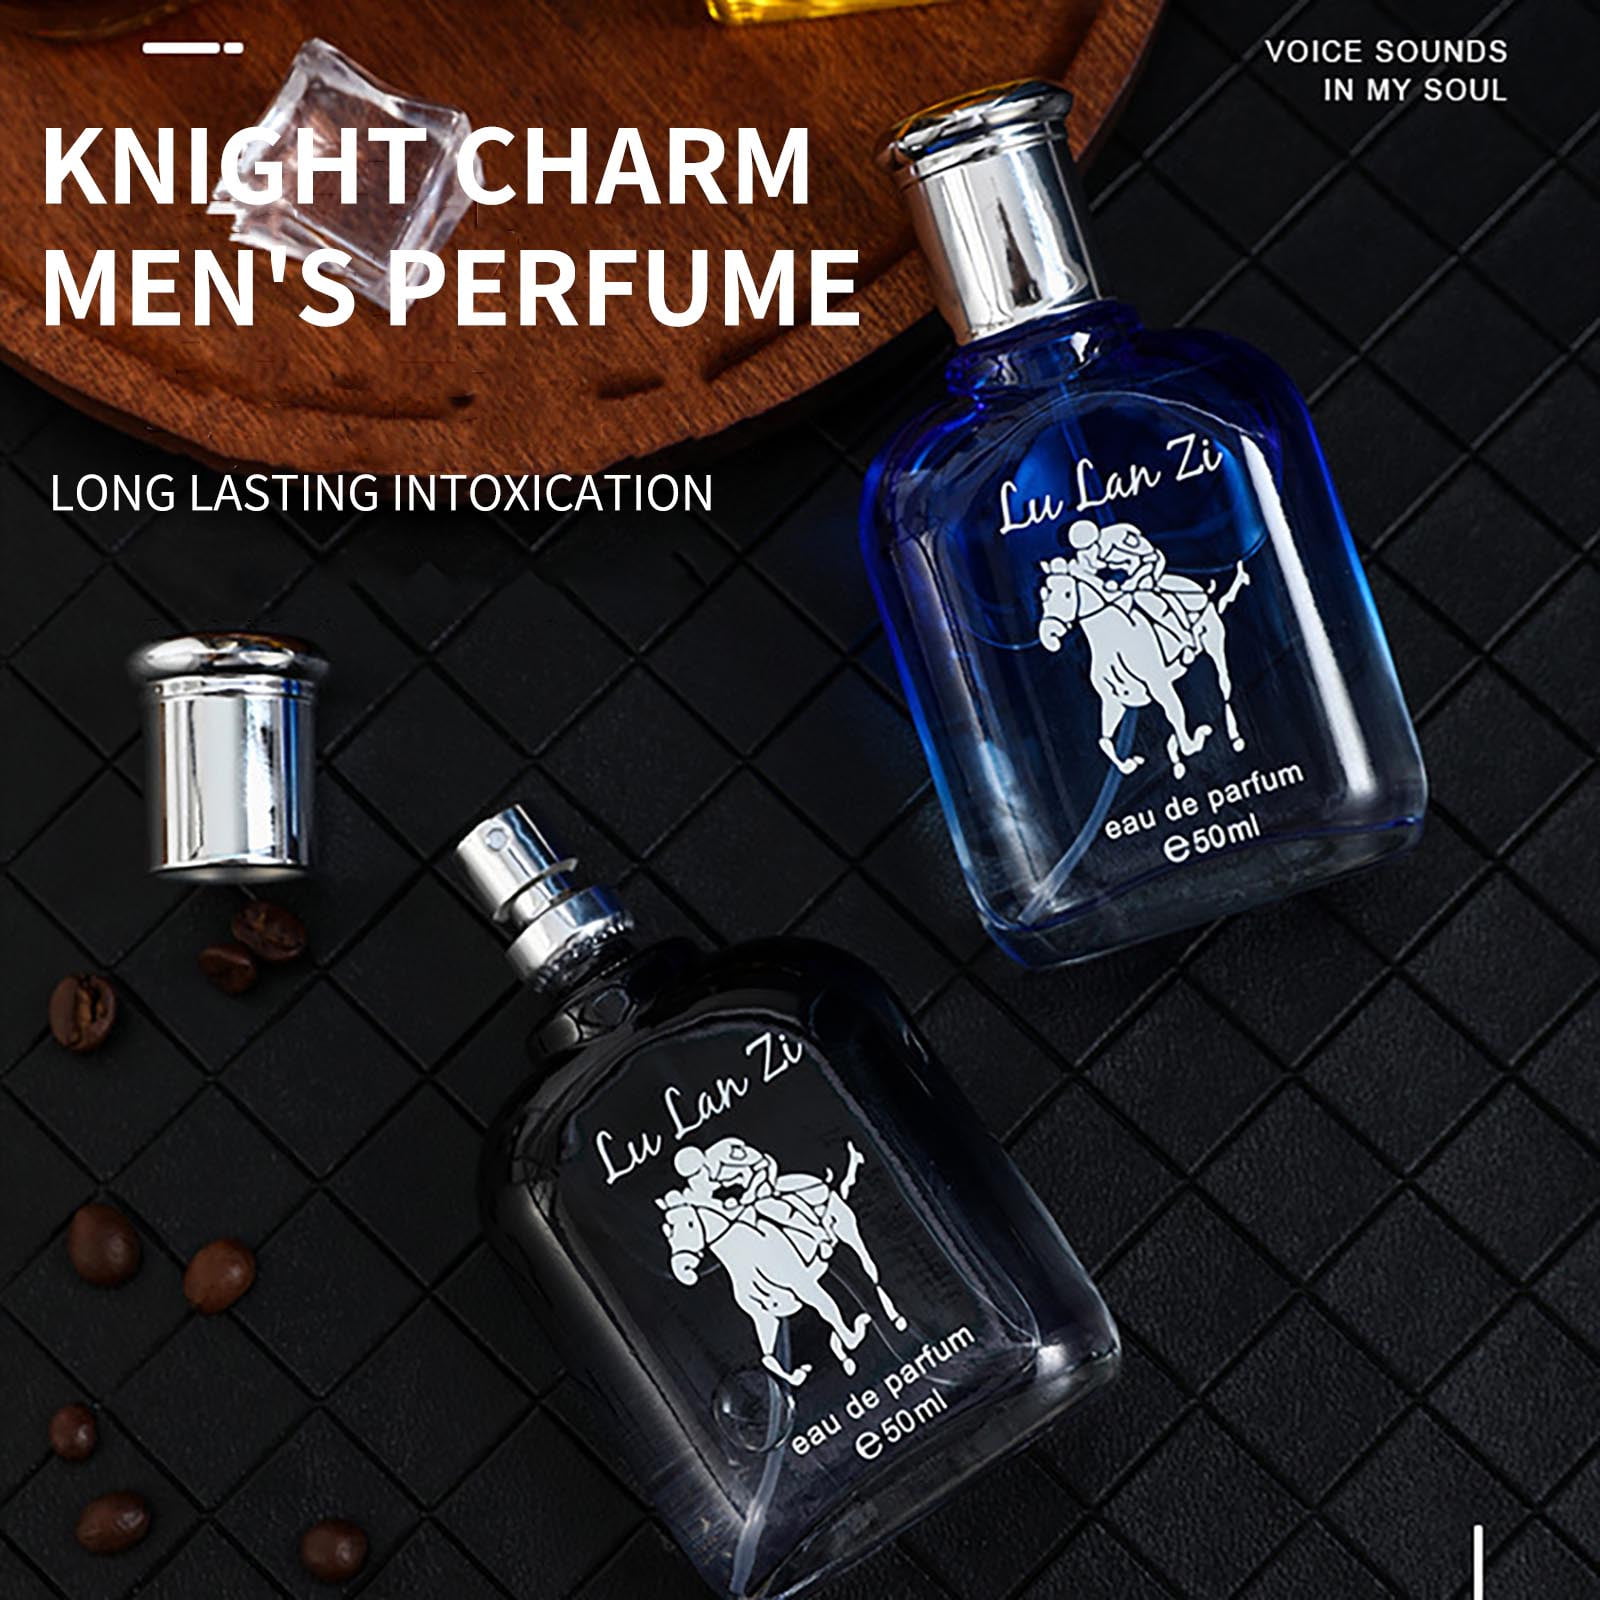 20PCS Lure Her Perfume for Men - Lure Pheromone Perfume,Golden Pheromone  Cologne for Men Attract Women(for Him),If you do not receive 20, you will  receive a full refund 